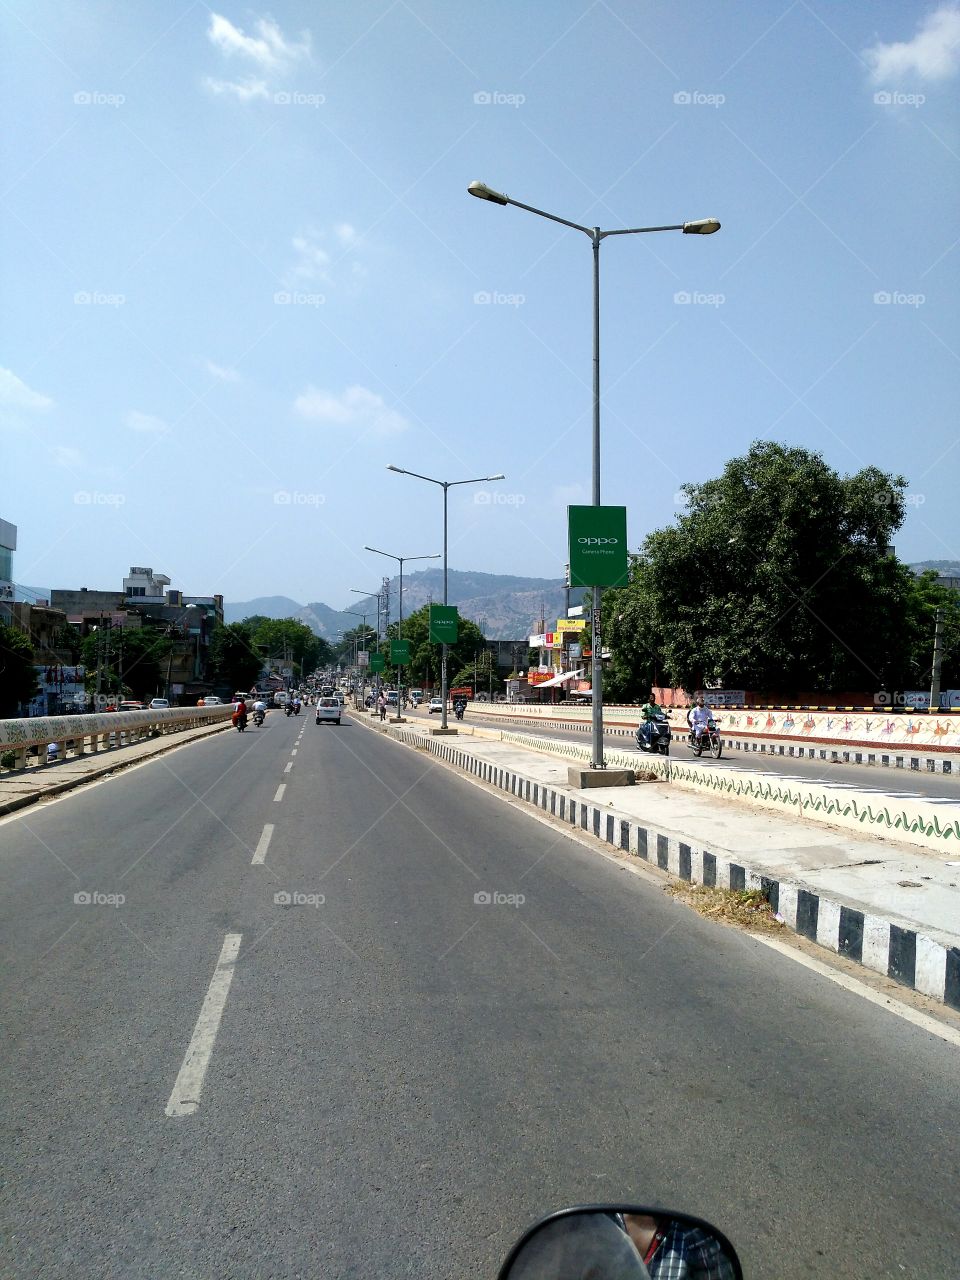 view from overbridge